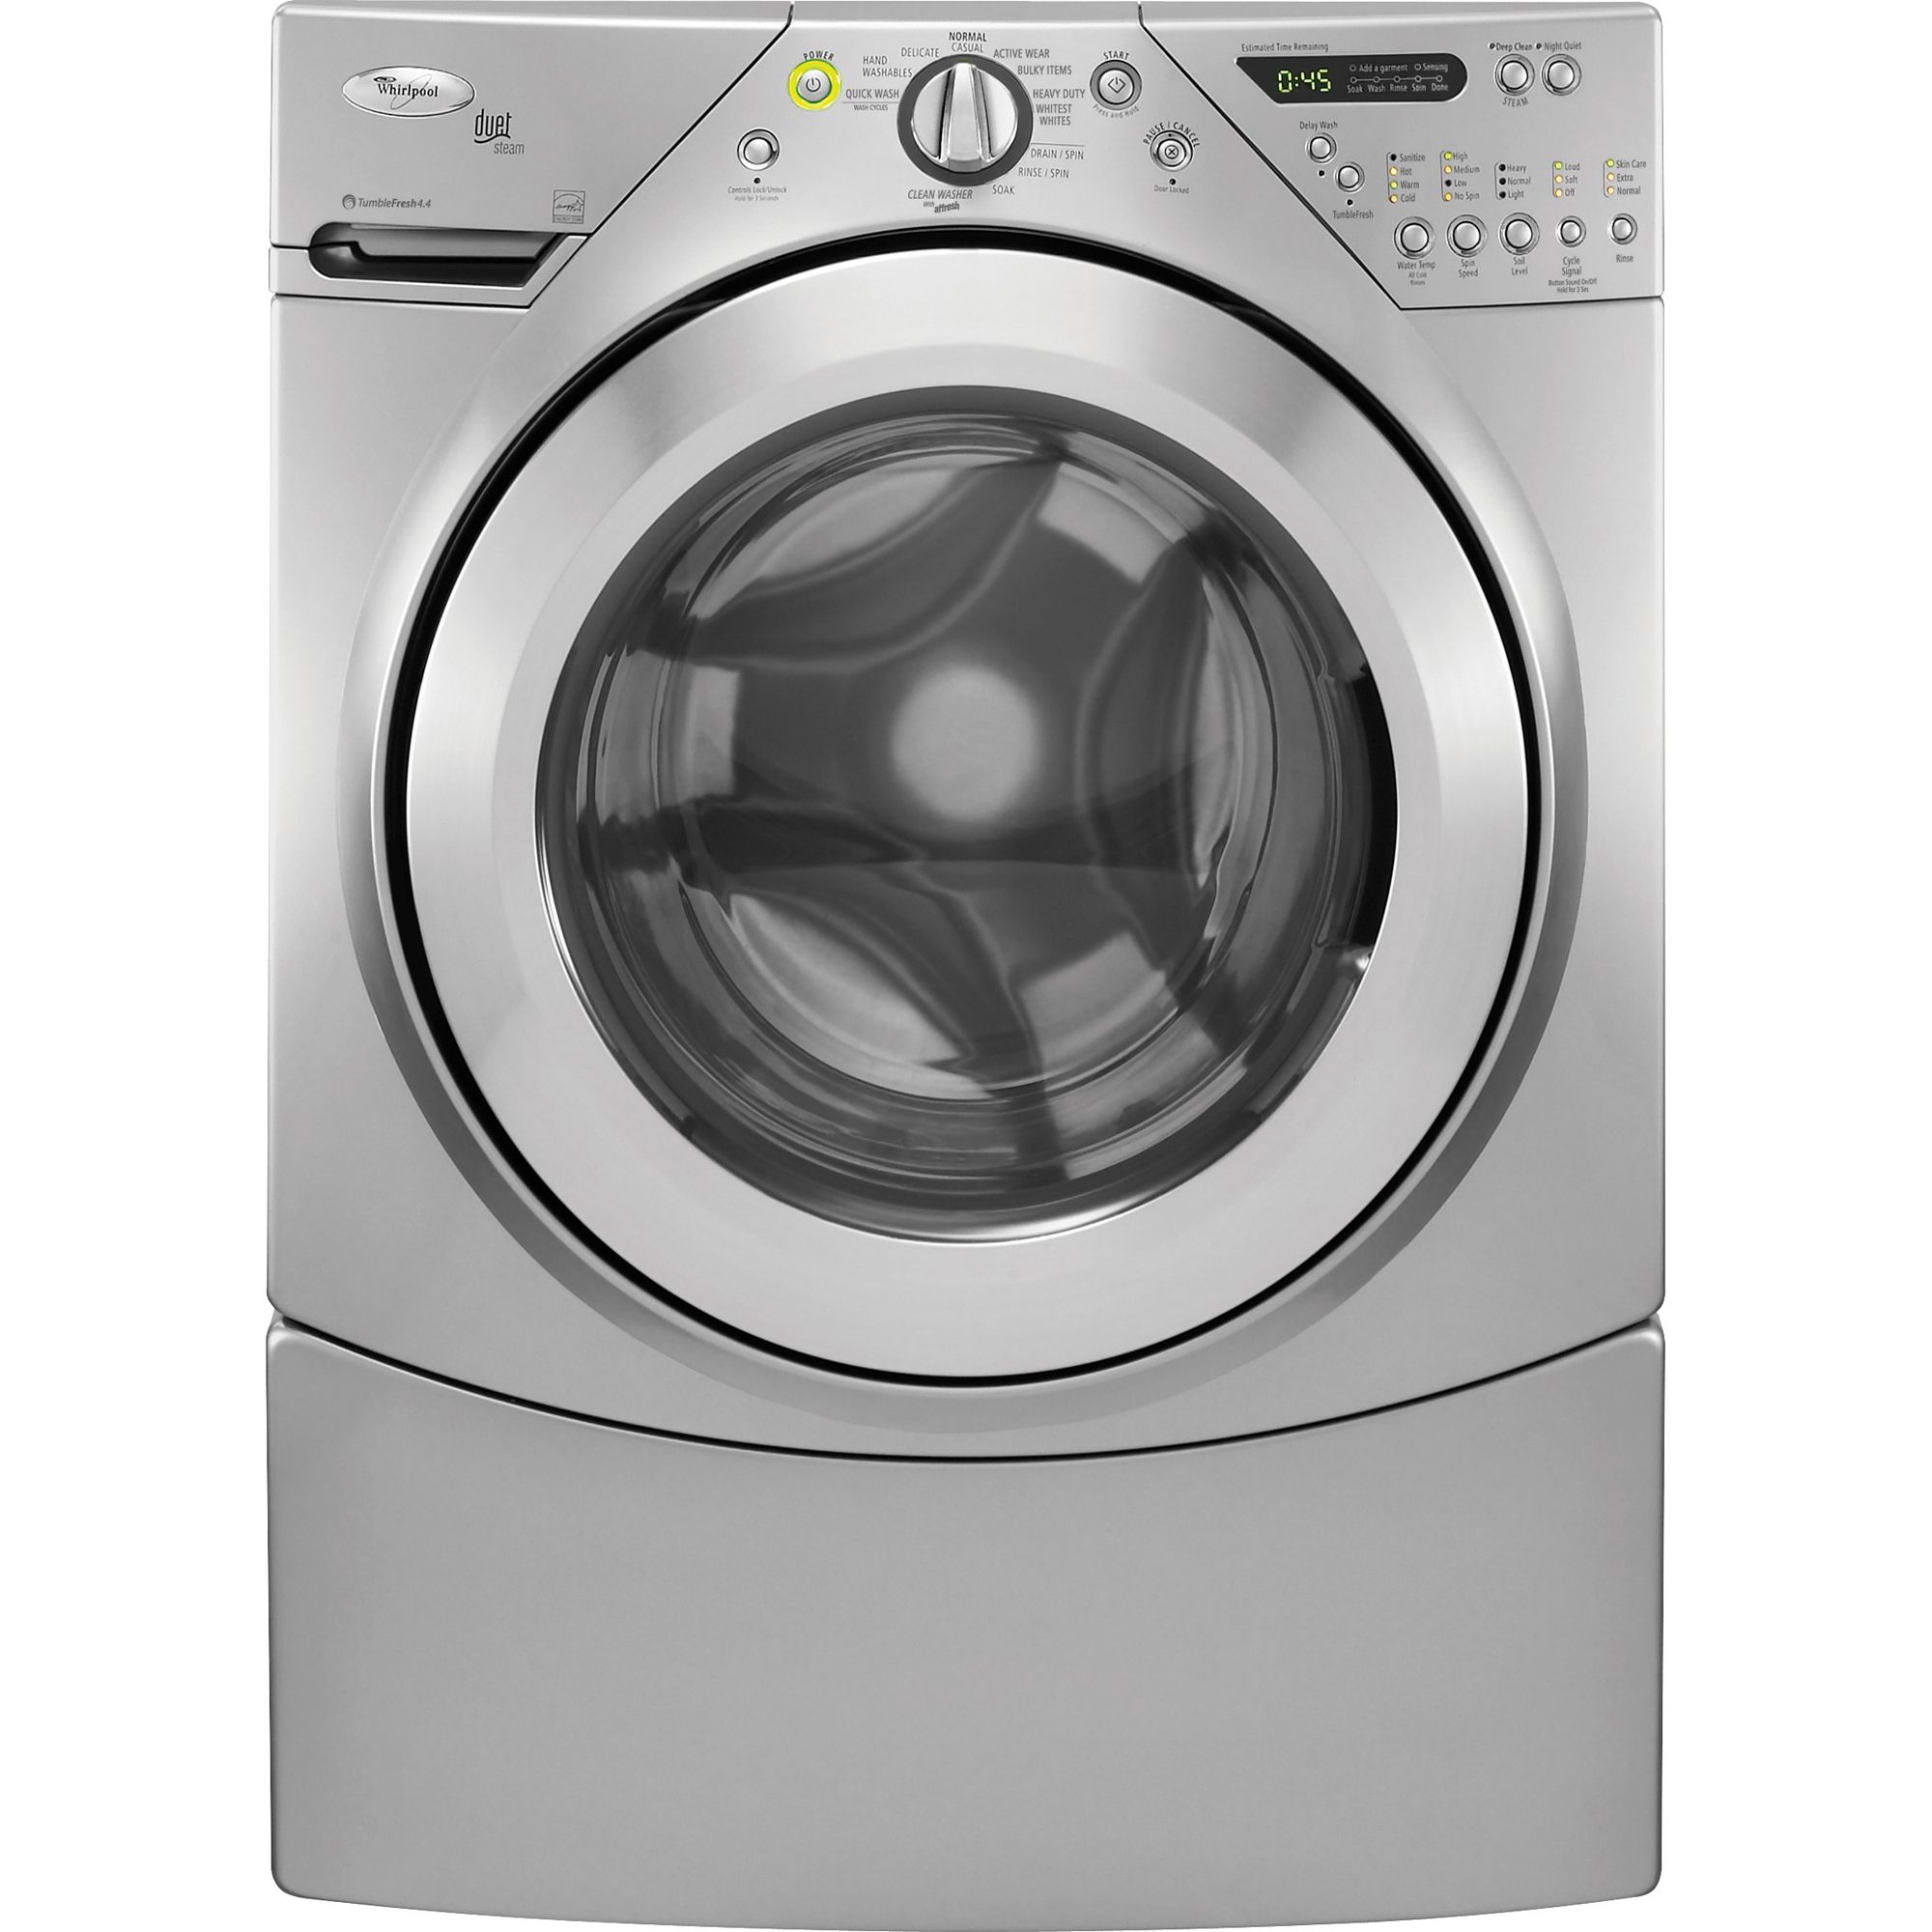 What problems do Whirlpool Duet front loading machines have?